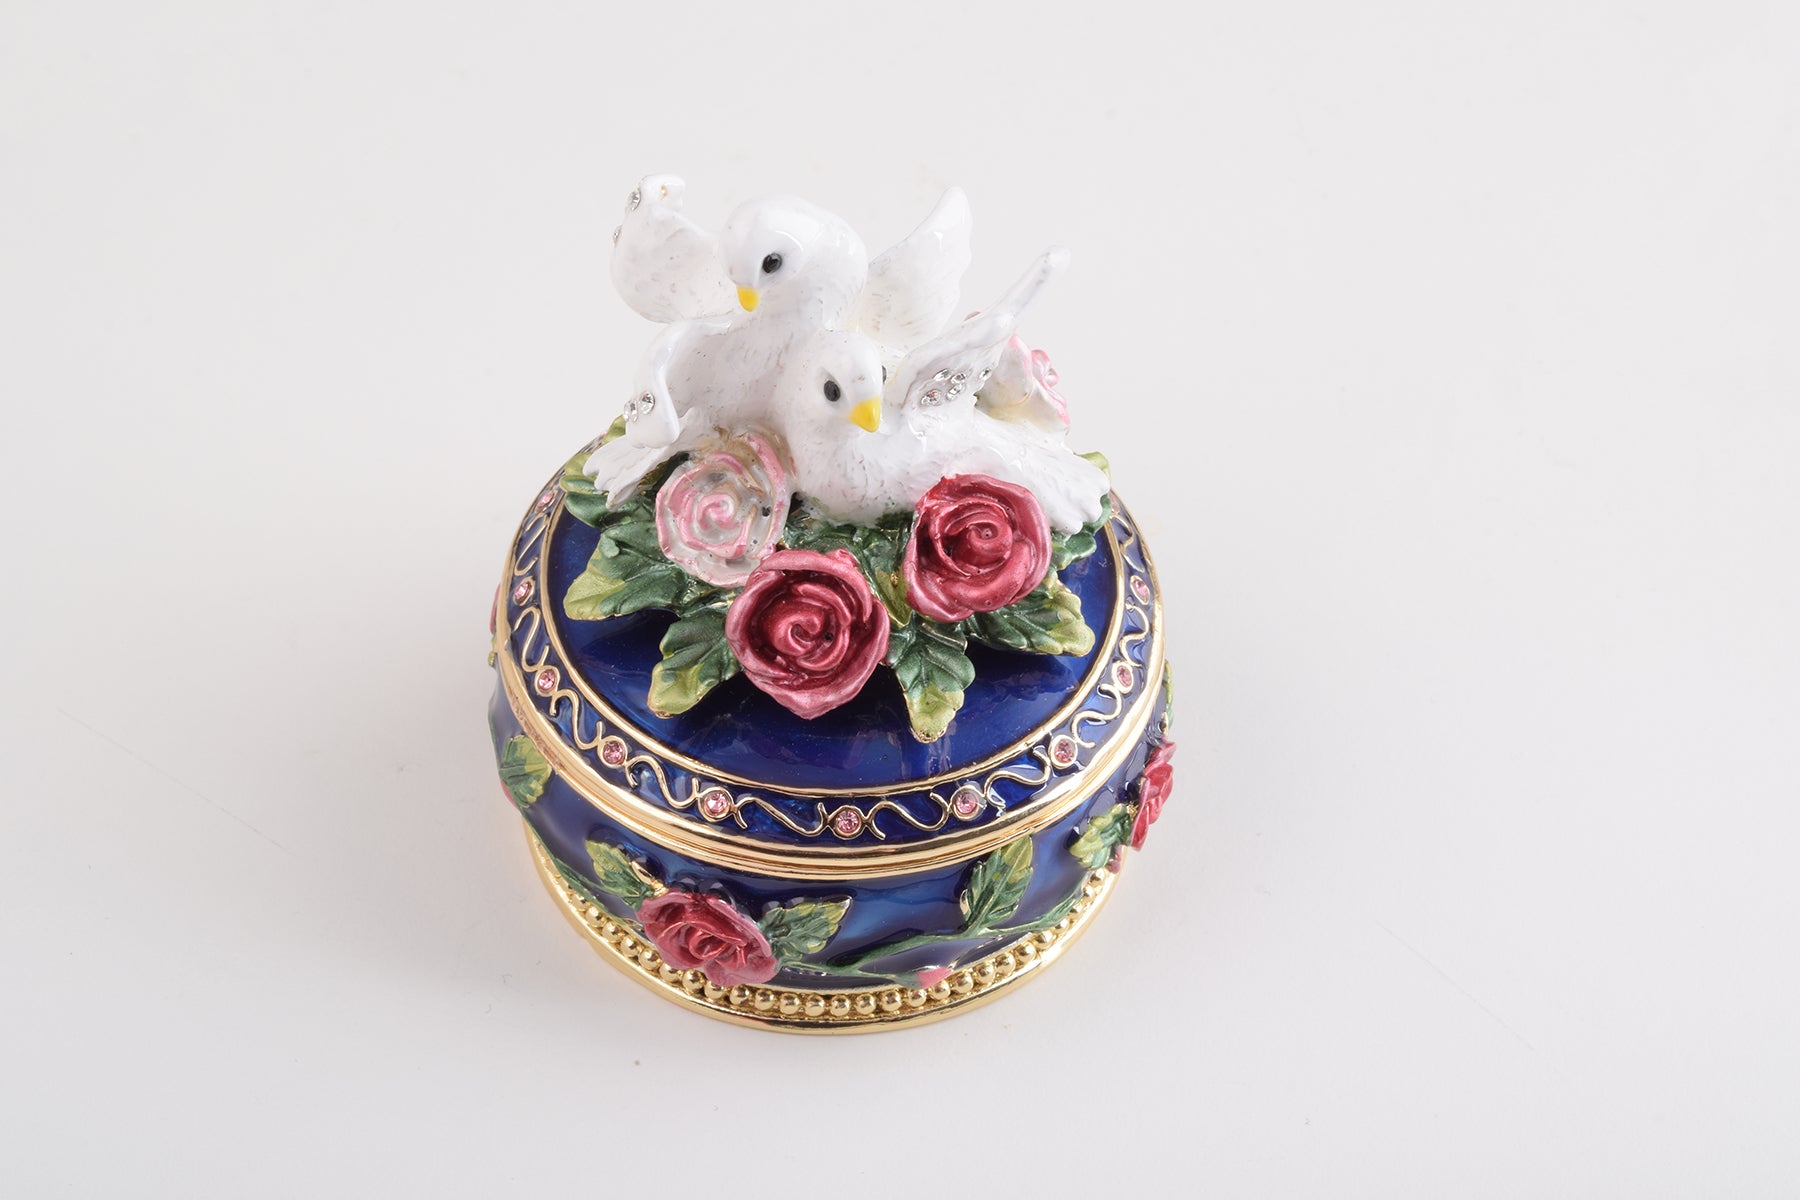 Blue Box with Roses Decorated with Two White Doves